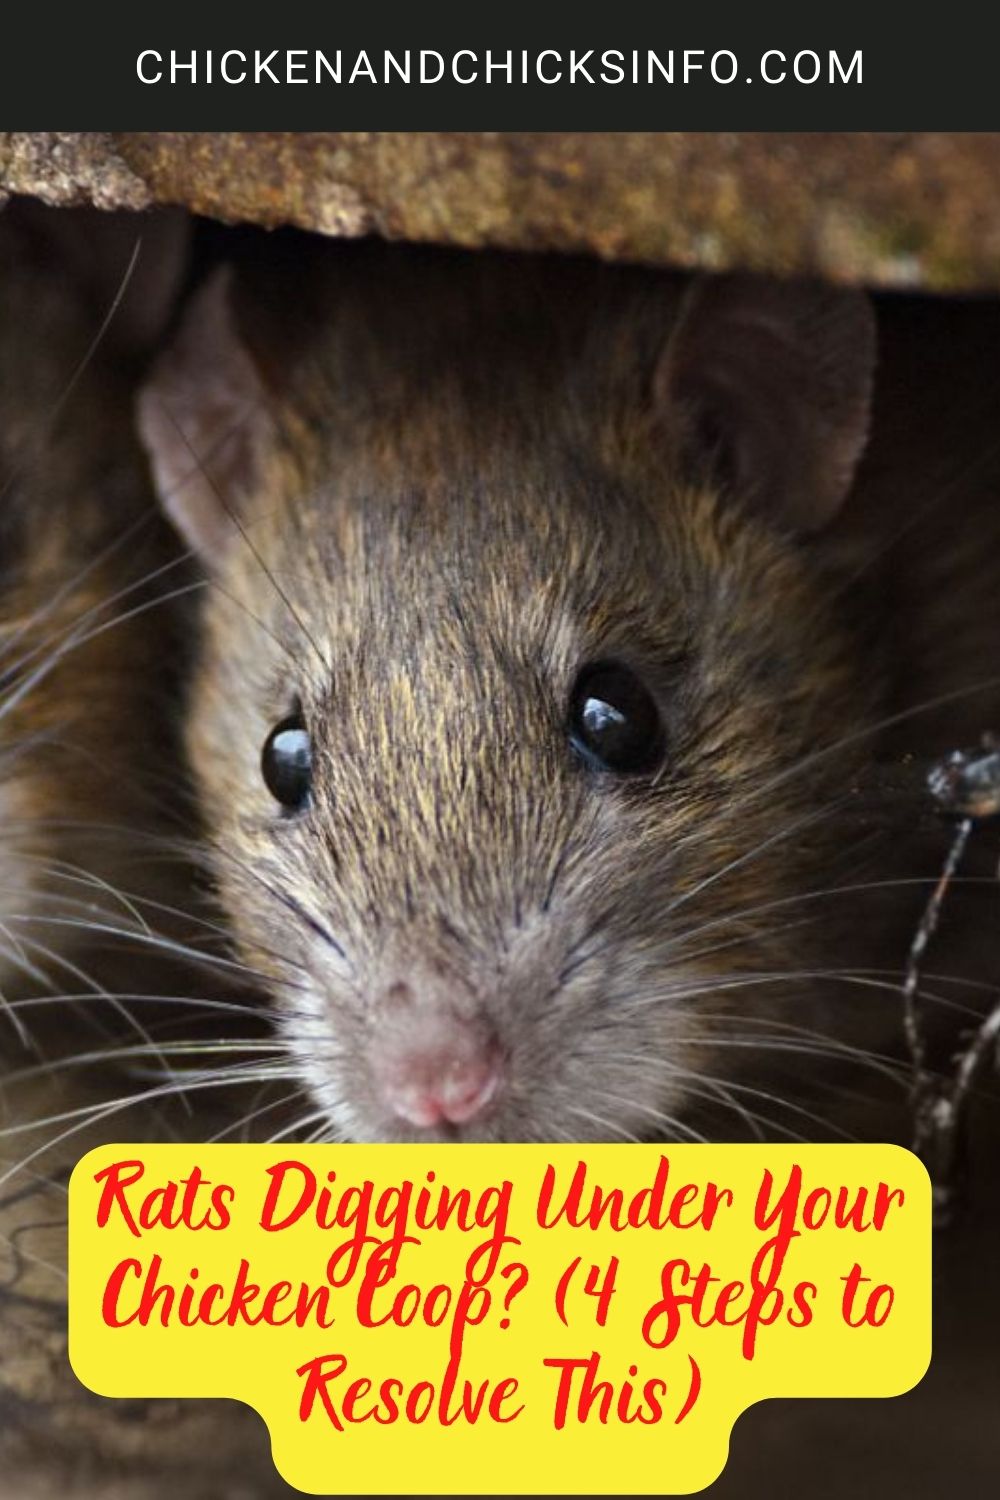 Rats digging under your chicken coop poster.